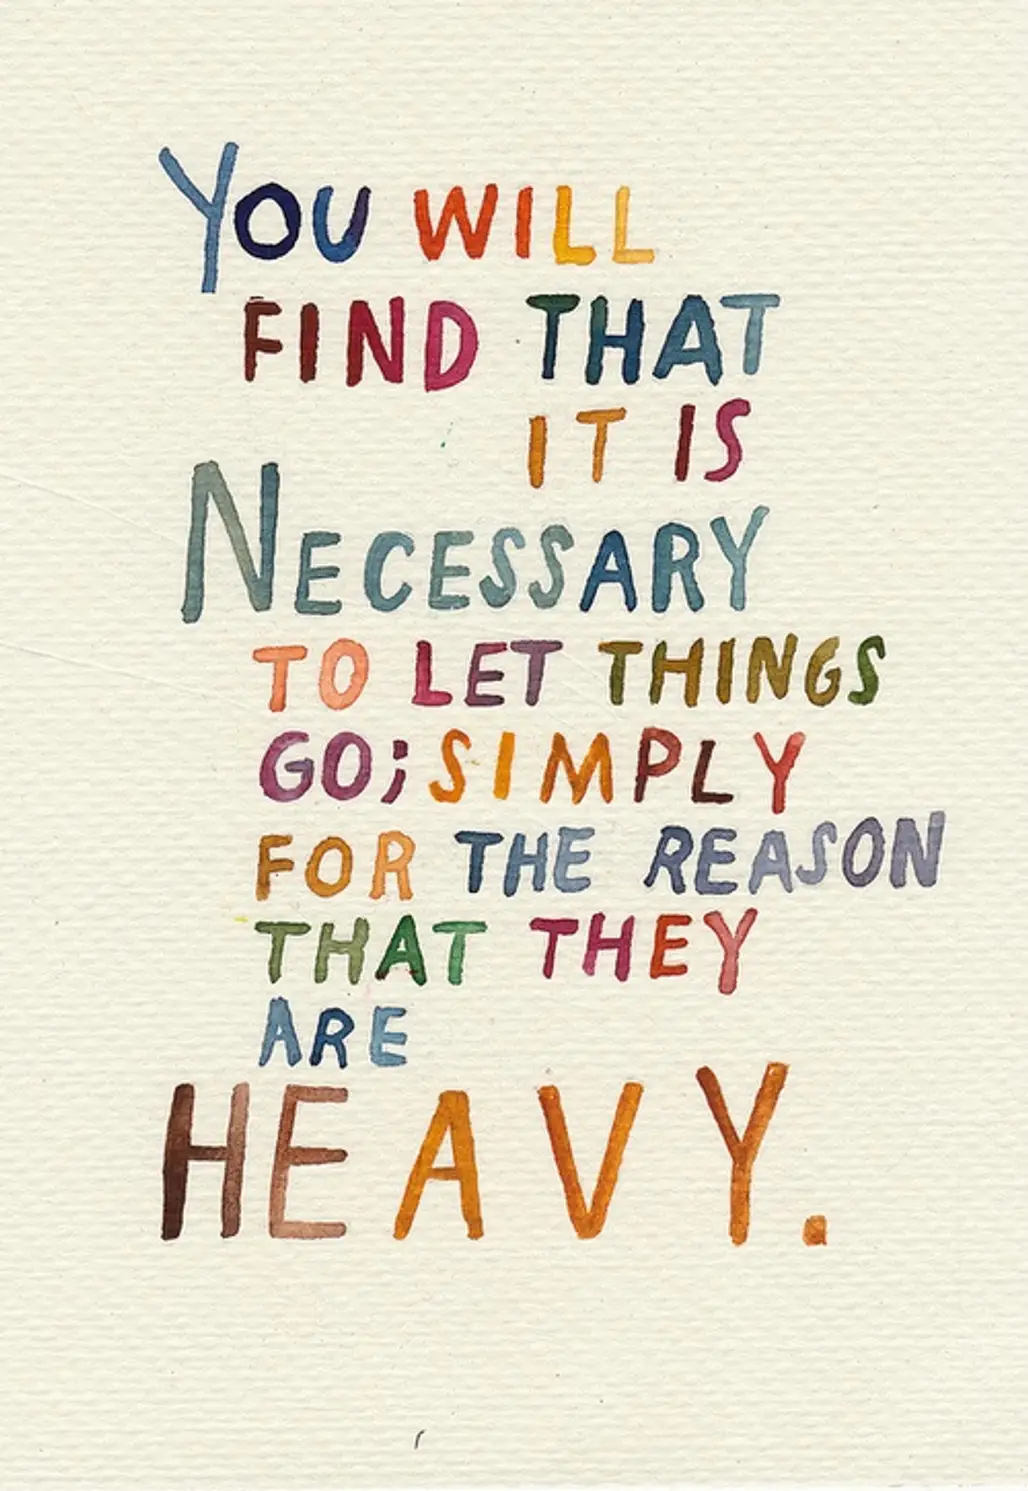 You Will Find That It is Necessary to Let Things Go, Simply for the Reason That They Are Heavy